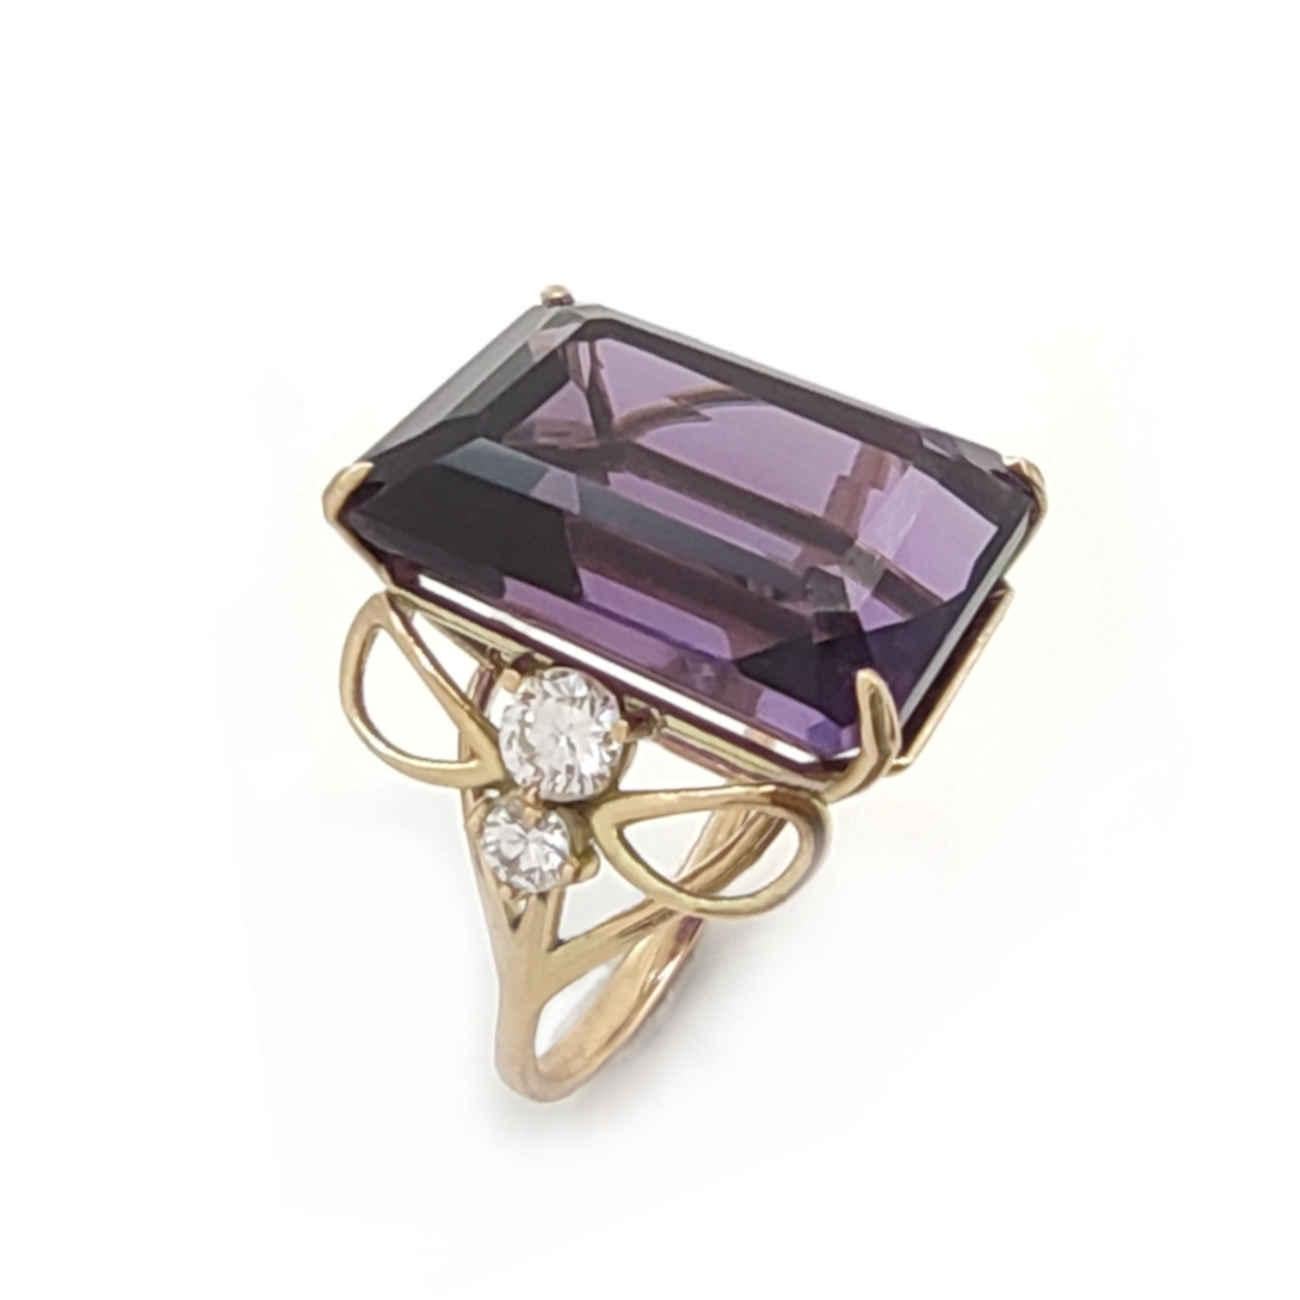 SPECIFIC DETAILS:
- European Size: 15.5
- American Size: 7.25

- One untreated natural emerald-cut amethyst weighing 15.14 carats.
  - Measurements: 17.9 x 13 x 8.7mm
- Two brilliant-cut diamonds with a total weight of 0.40 carats.
  - Measurements: